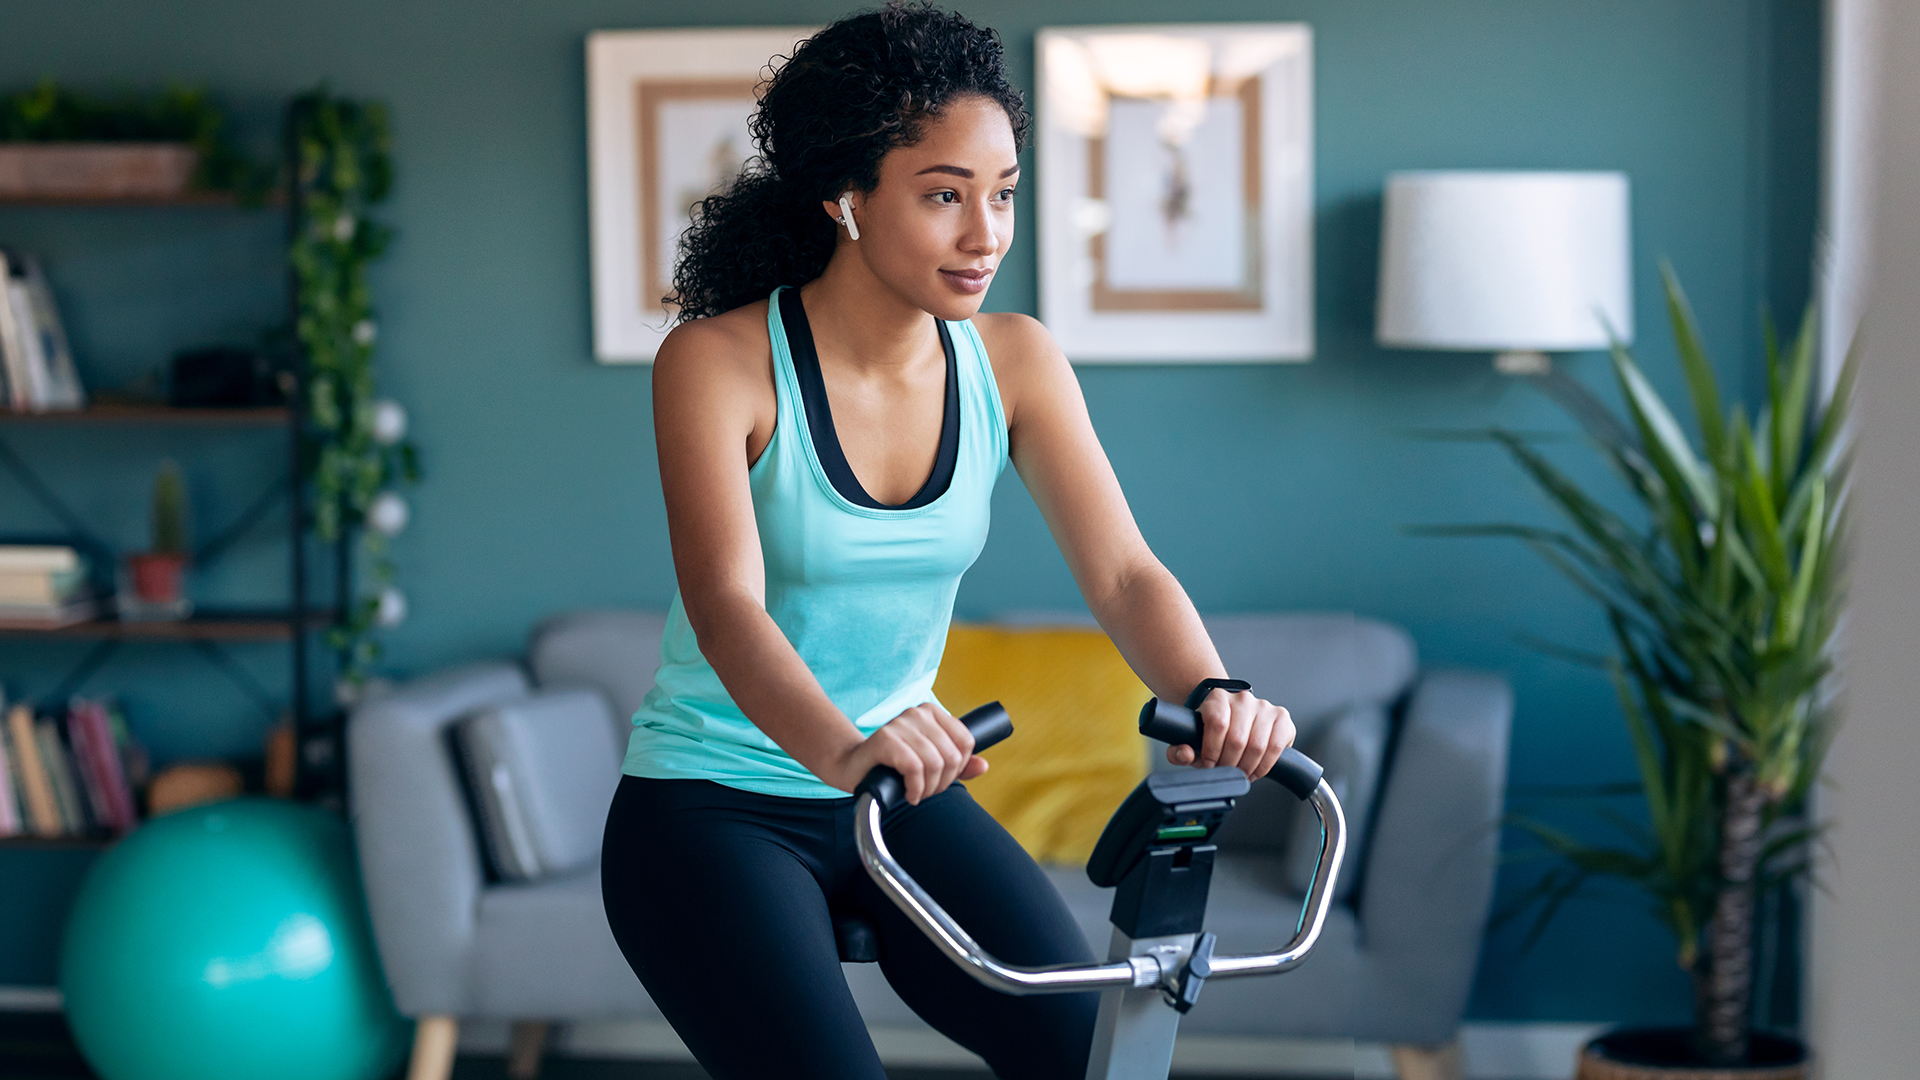 Exercise bike on sale: Woman working out on an exercise bike in her living room